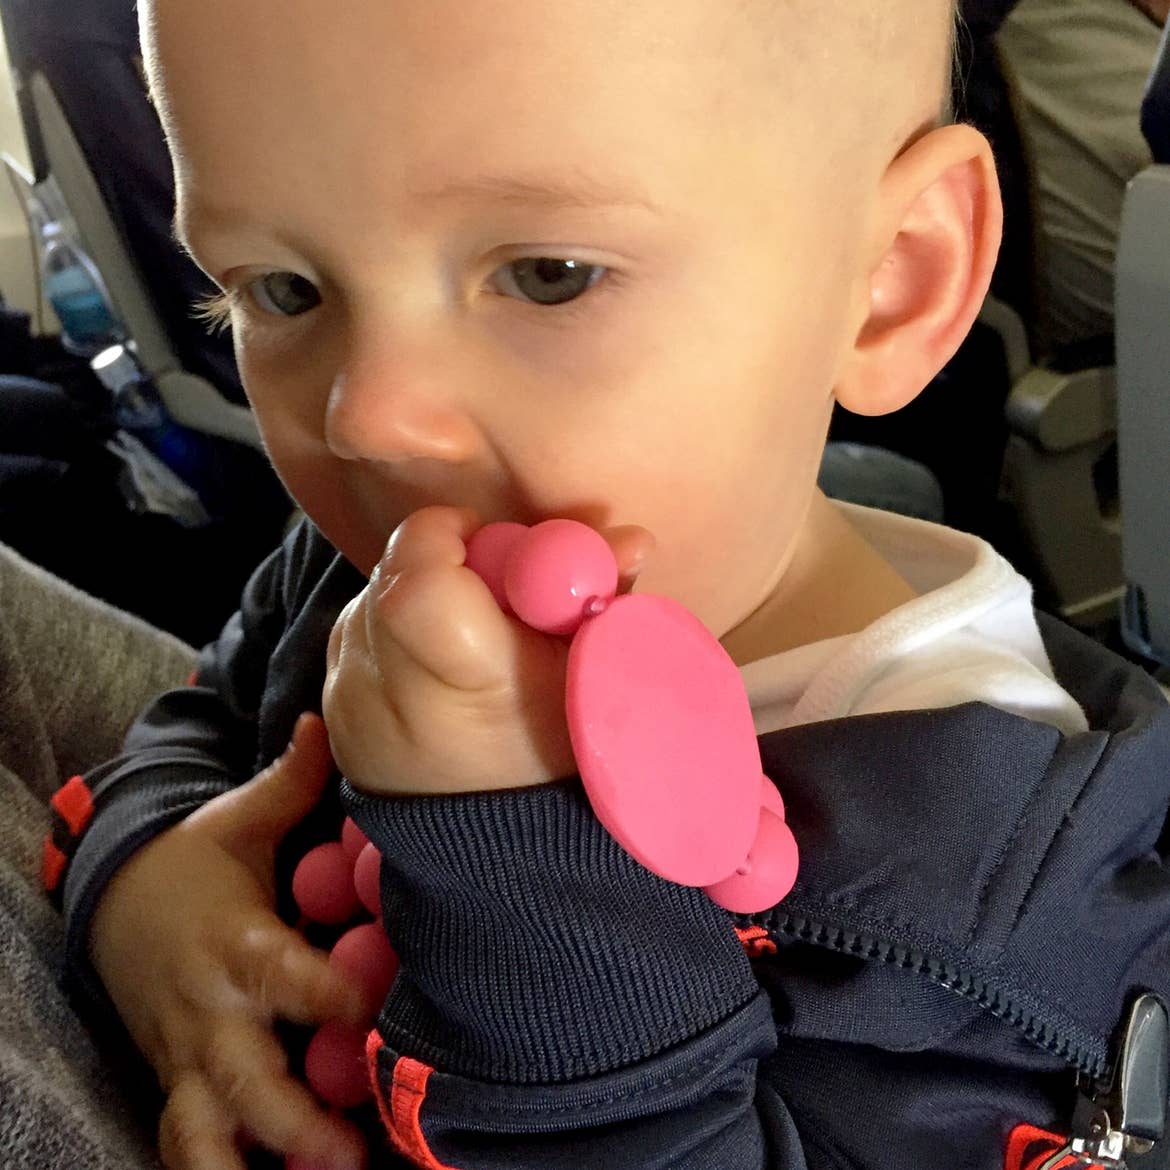 Sarah's son, Logan, as an infant holds a pink teething toy in the aircraft.